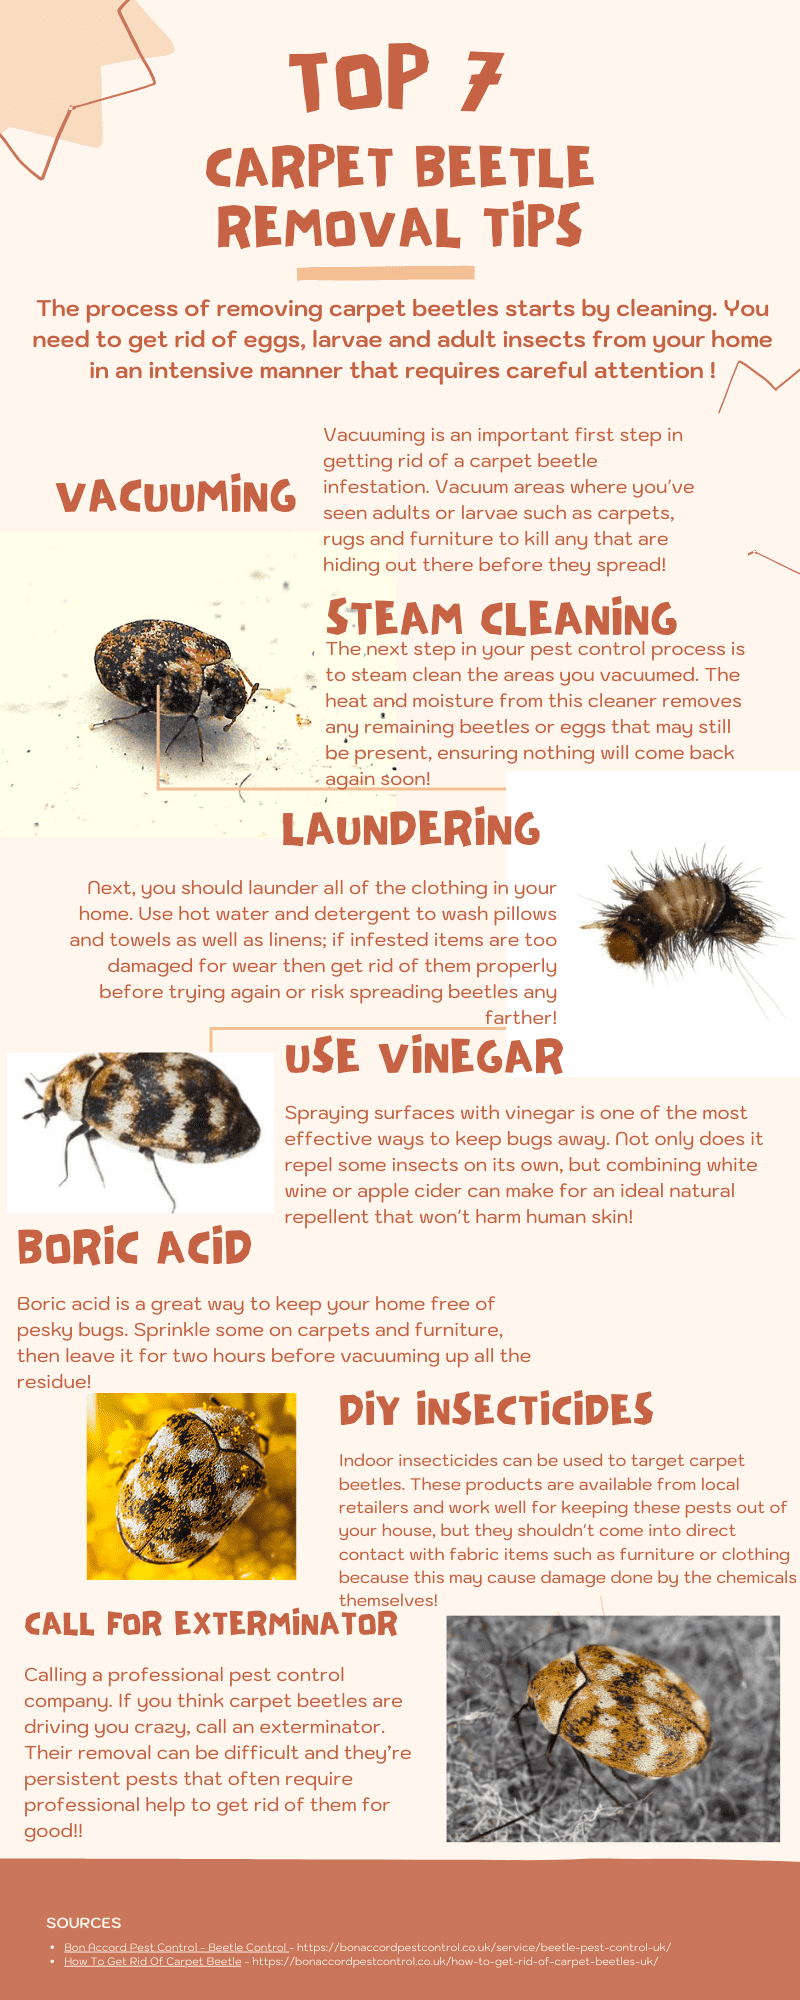 effective ways to keep carpet beetles away expert tips prevention techniques